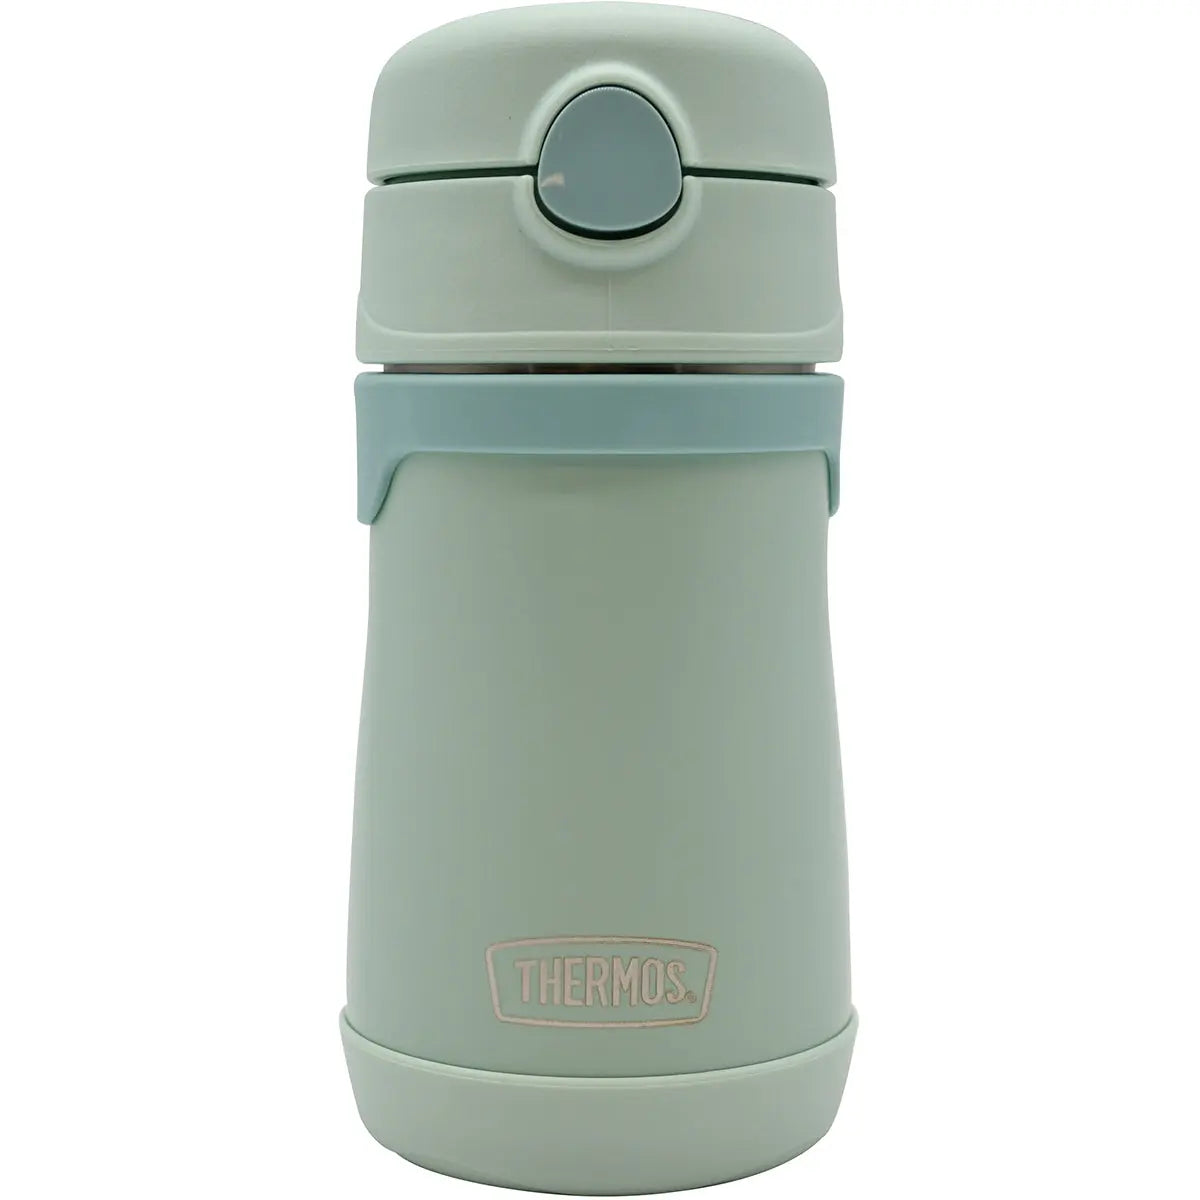 Thermos Baby 10 oz. Vacuum Insulated Stainless Steel Straw Bottle Thermos